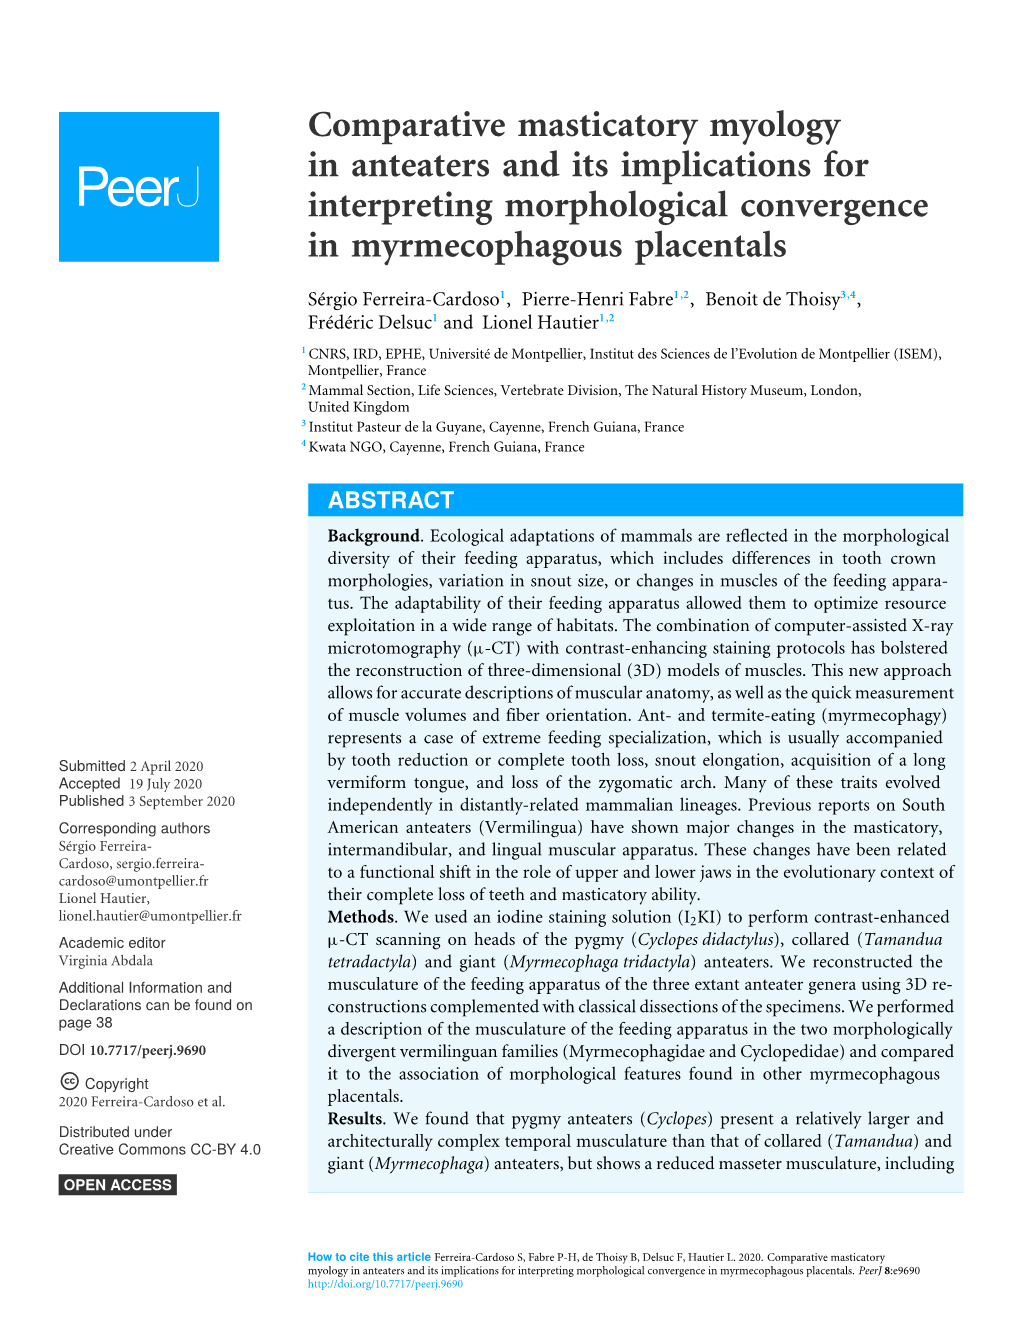 Comparative Masticatory Myology in Anteaters and Its Implications for Interpreting Morphological Convergence in Myrmecophagous Placentals